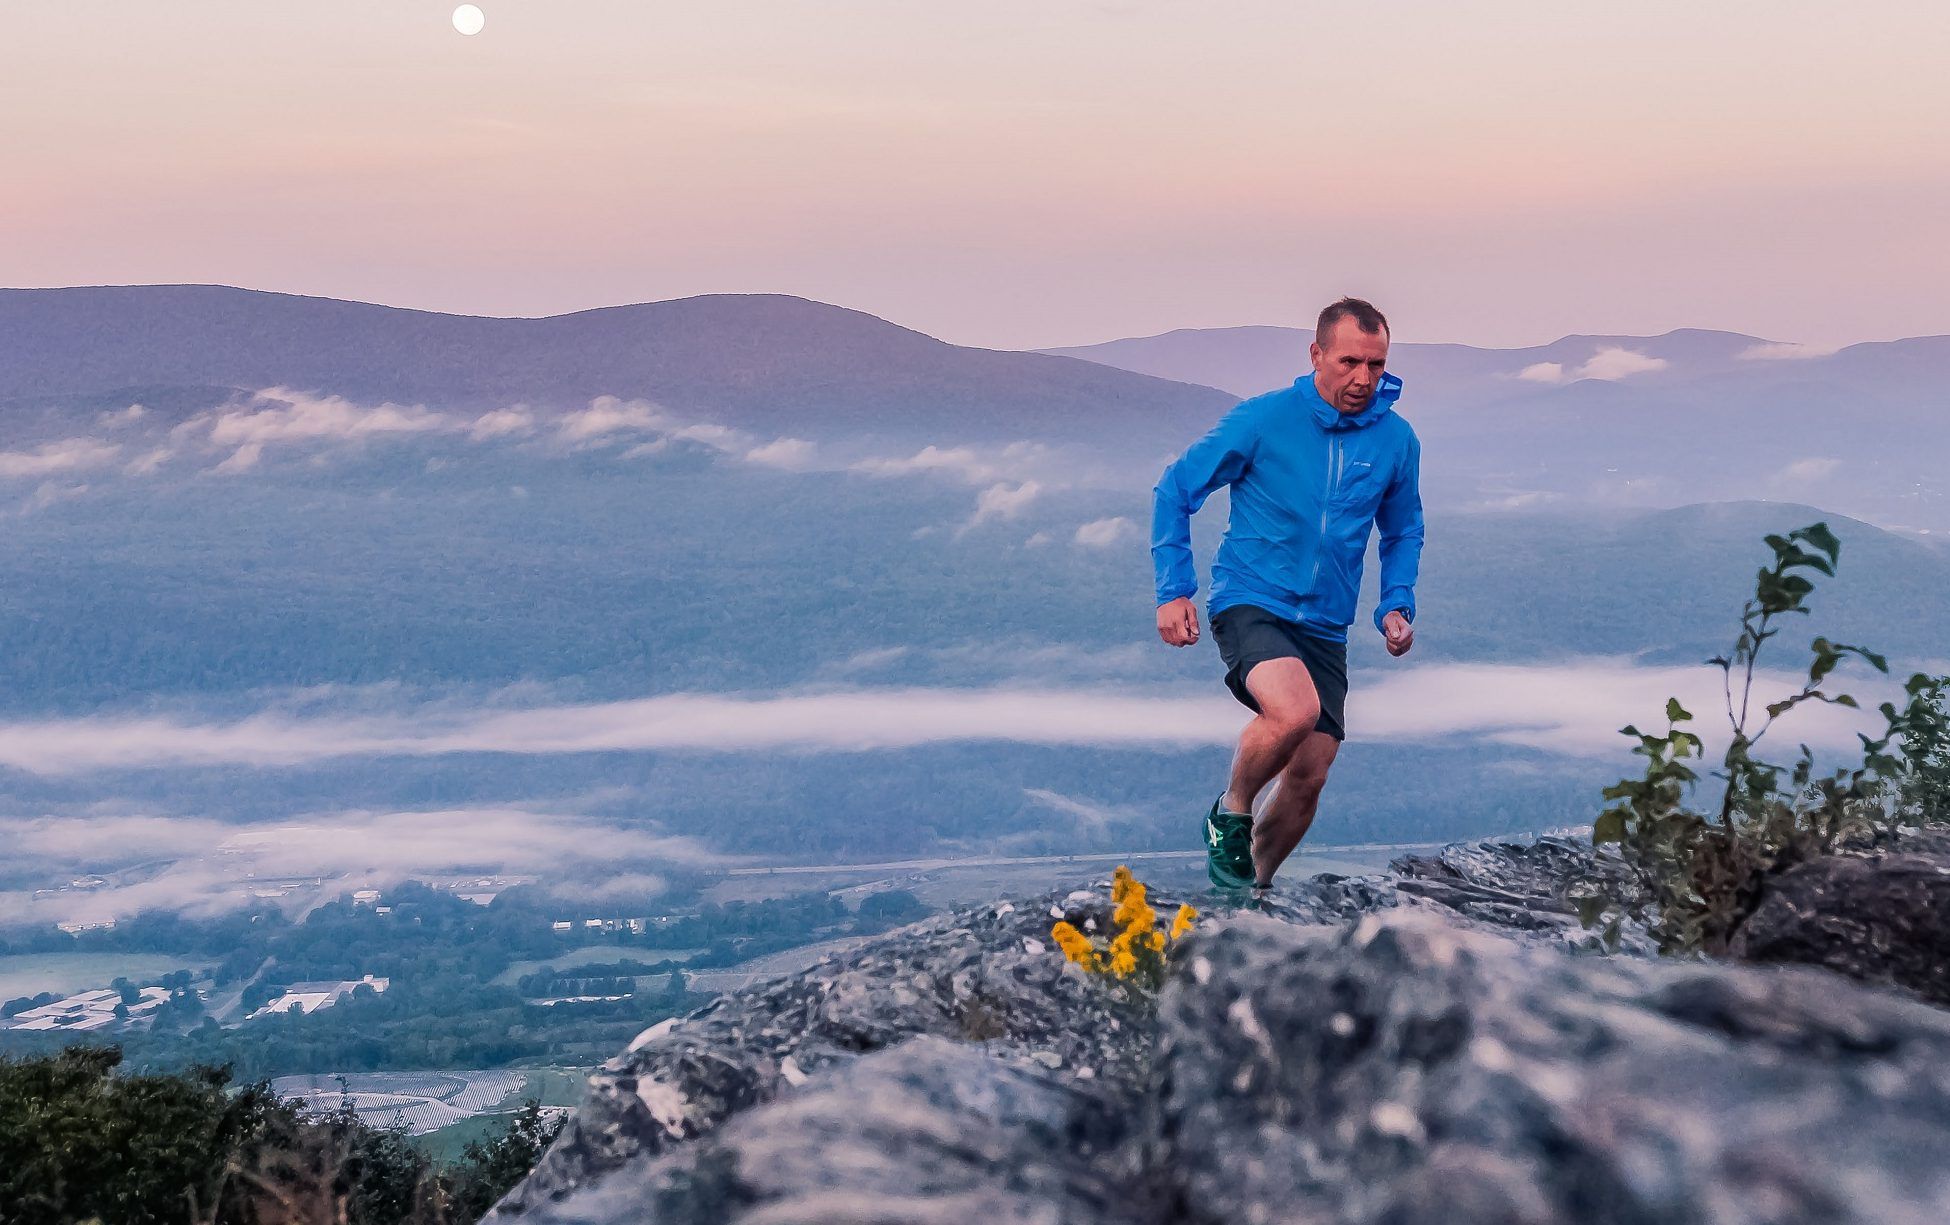 The Most Scenic Trail Running Destinations ReviewThis